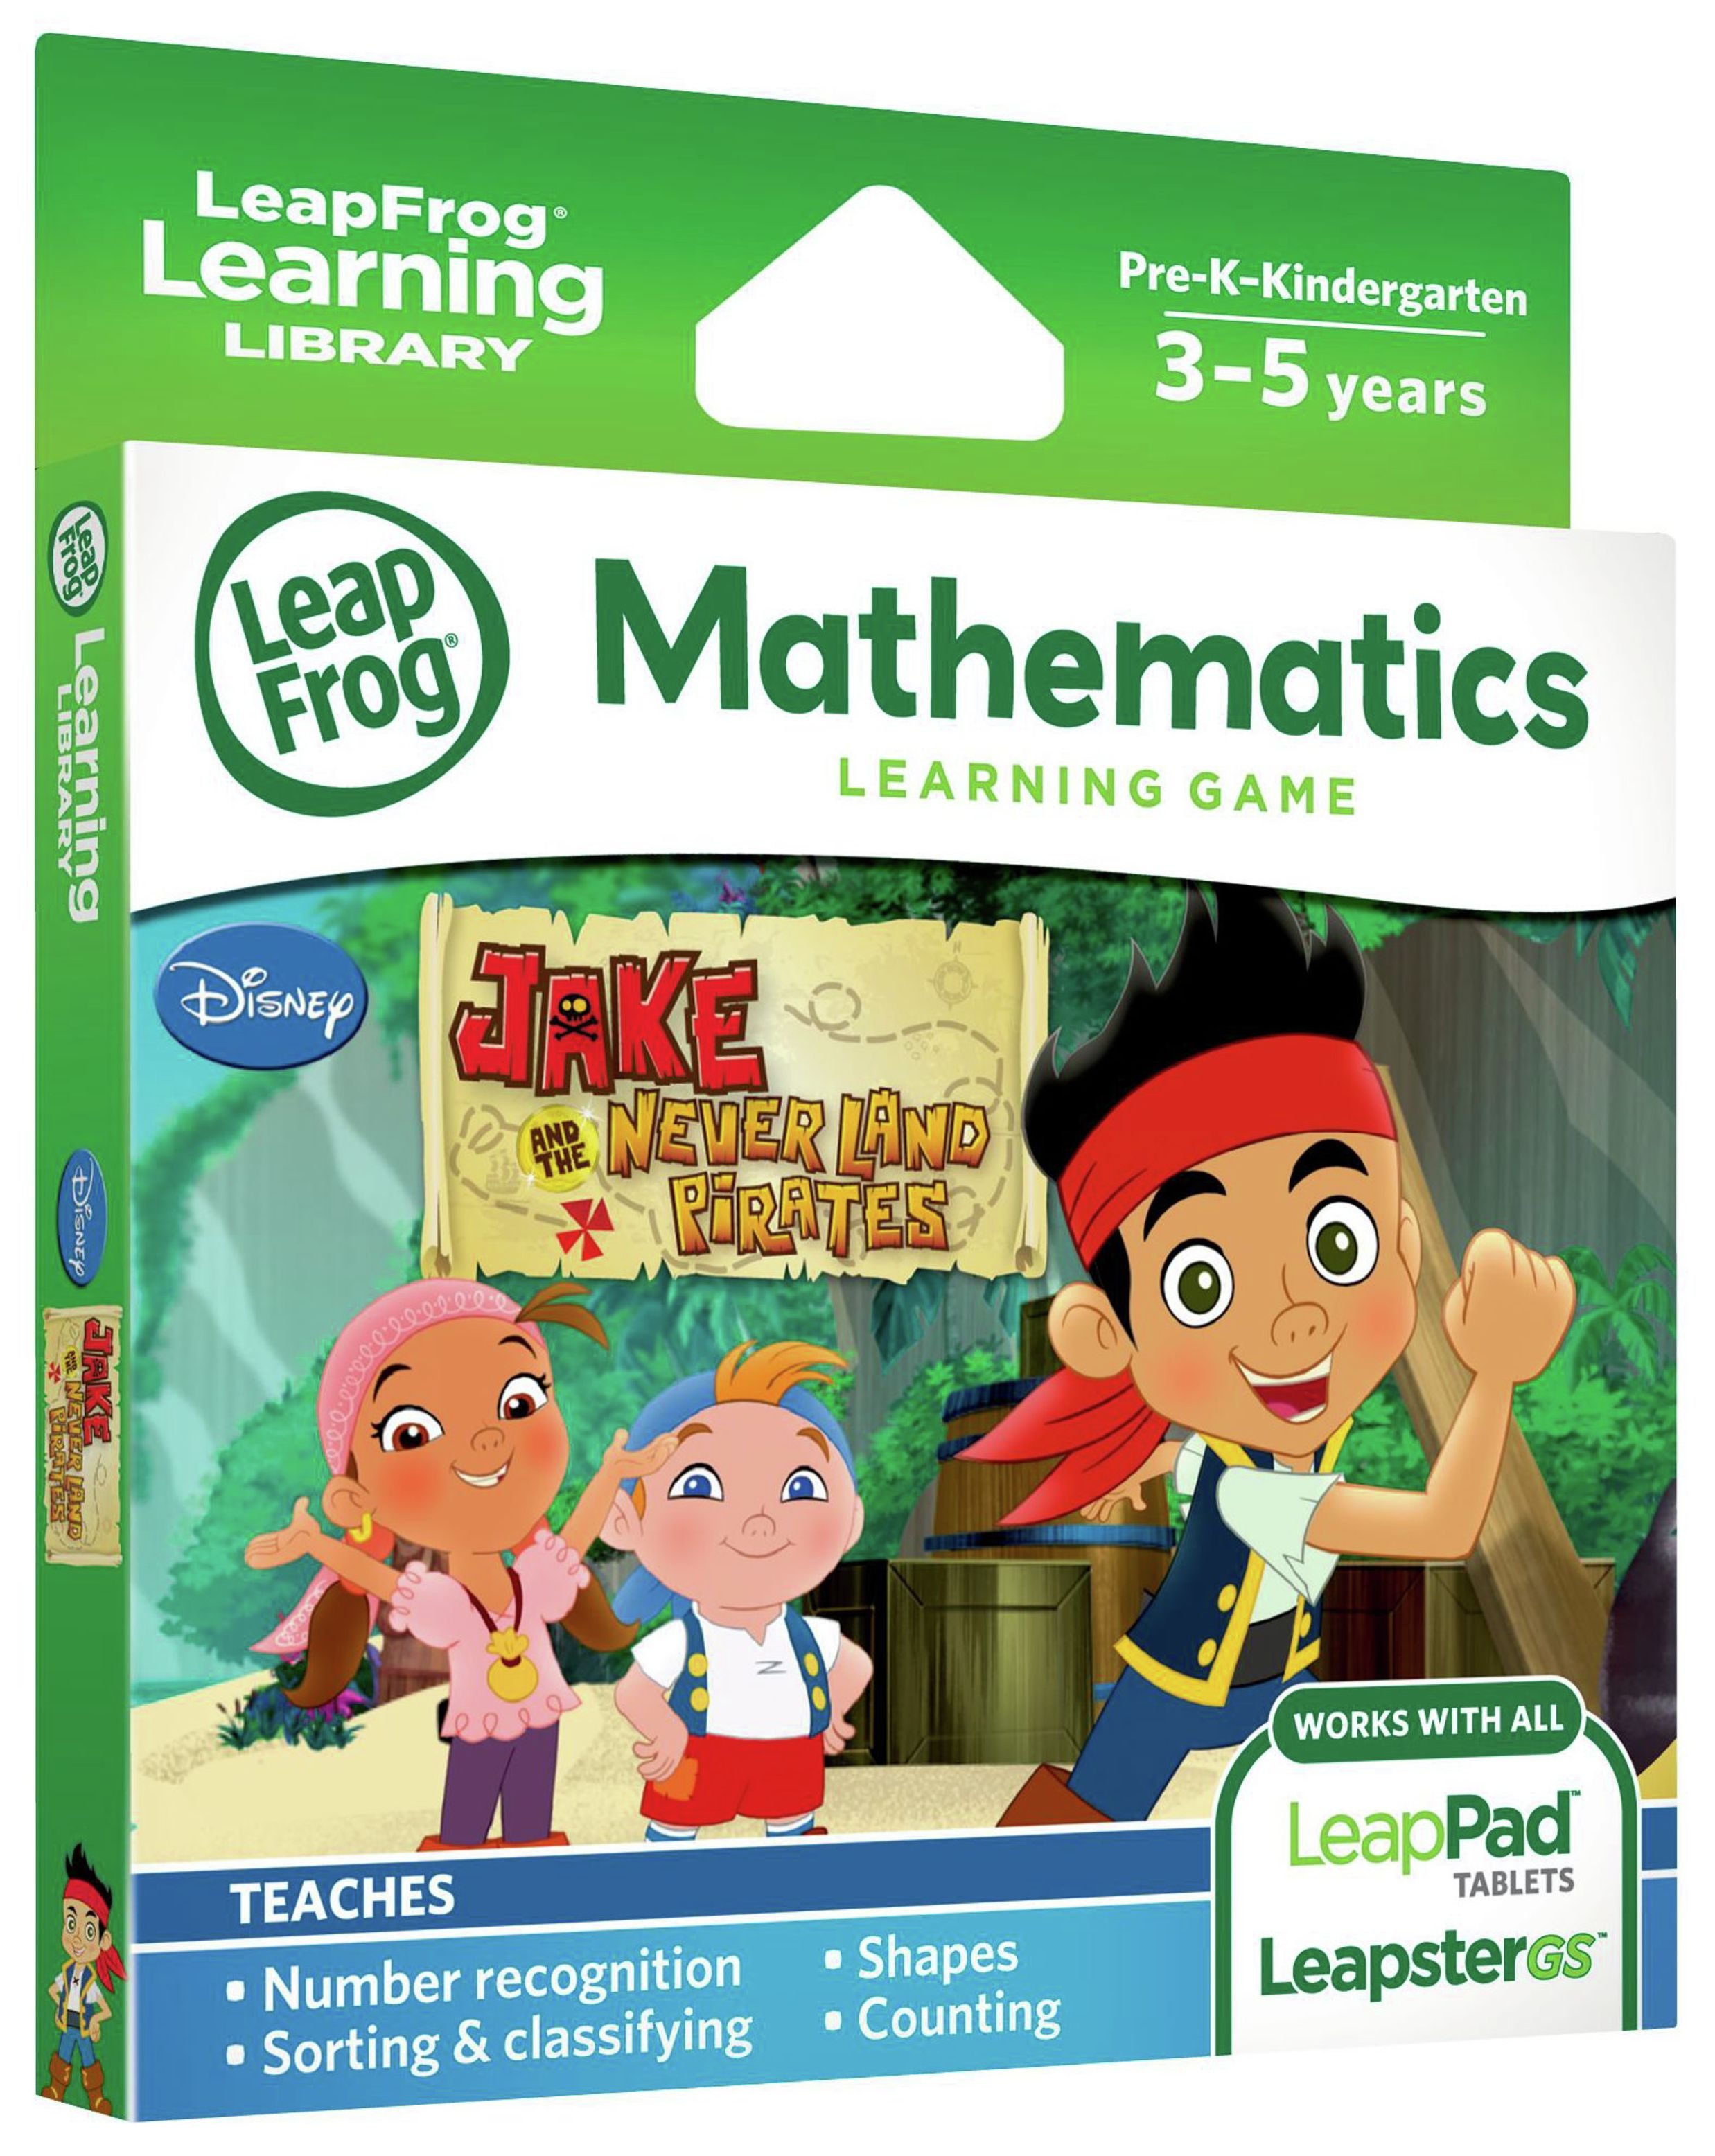 LeapFrog Jake and the Never Land Pirates Learning Game. review